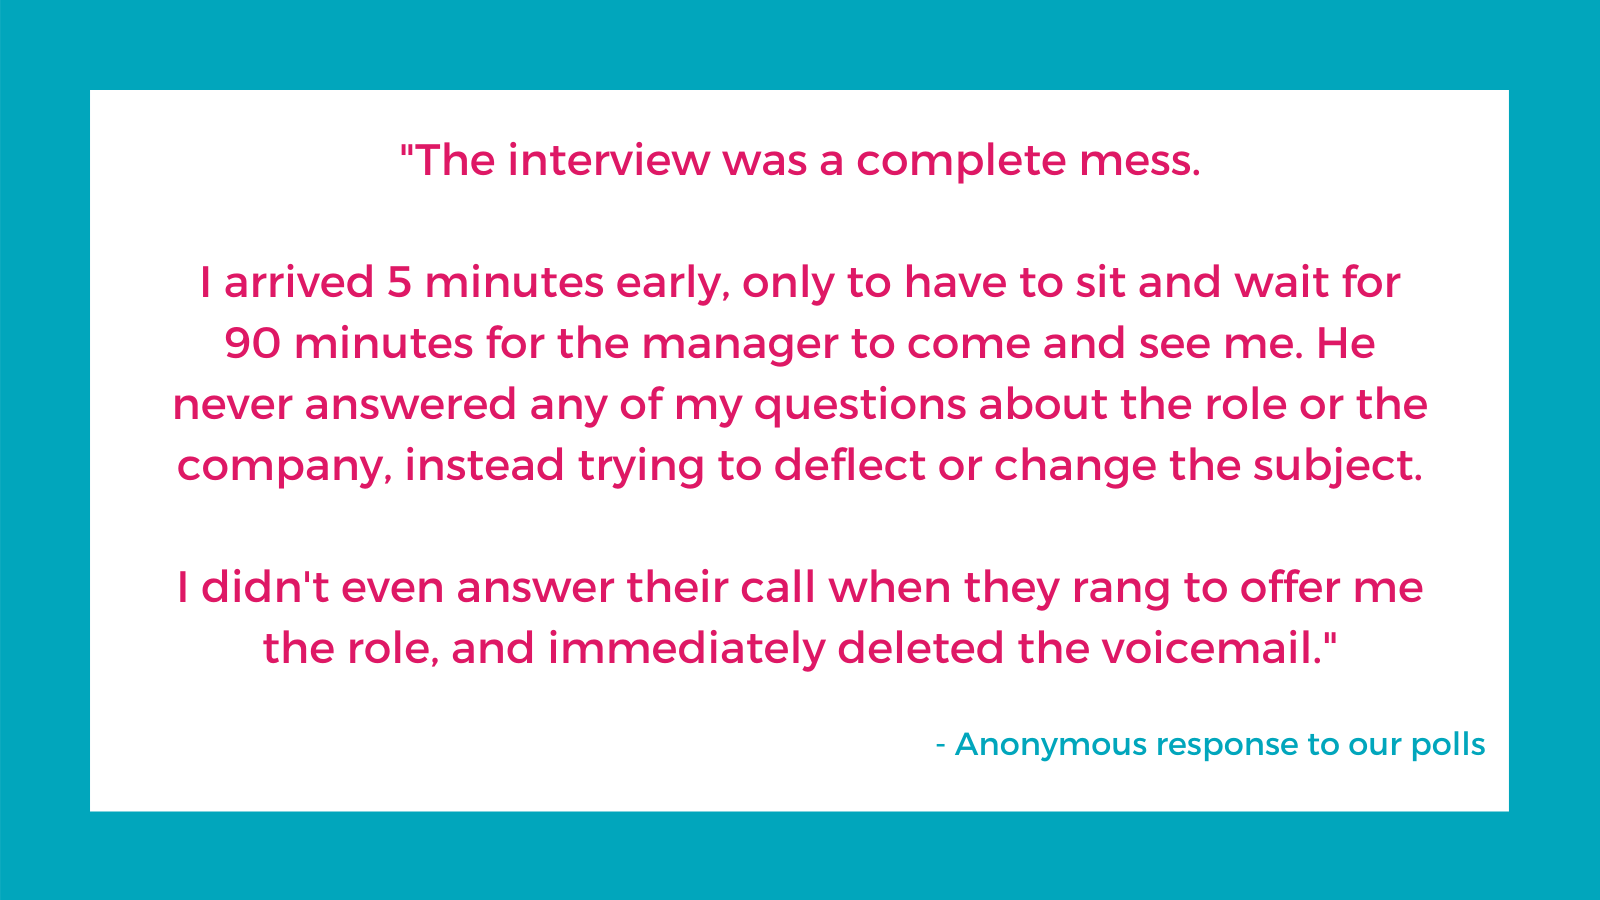 Quote from a respondent about a poor interview experience